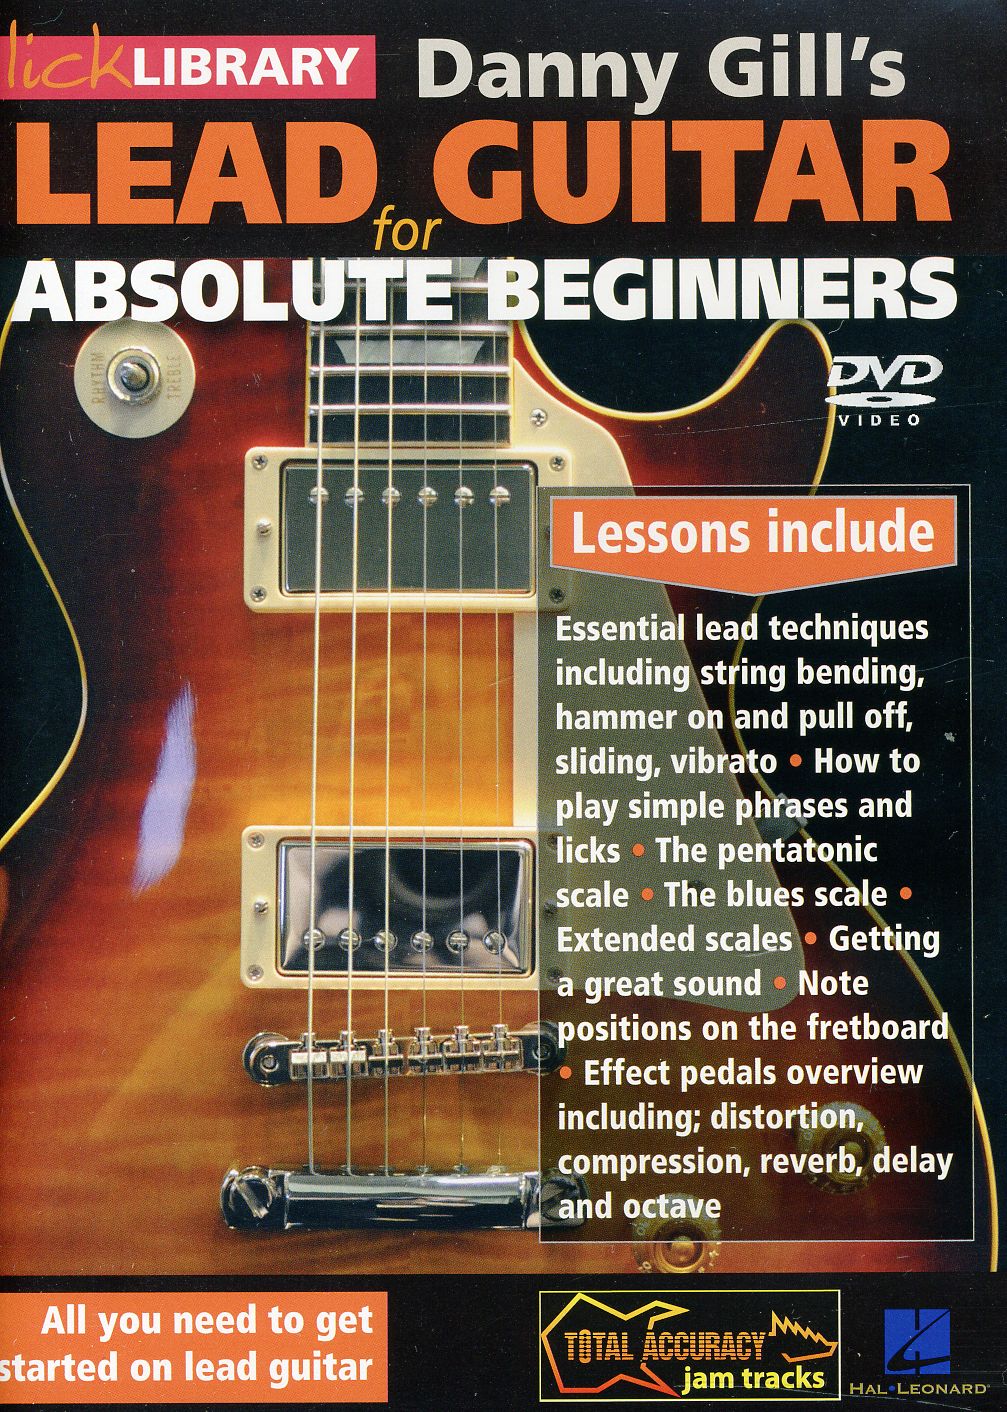 GILL,DANNY: LEAD GUITAR FOR ABSOLUTE BEGINNERS